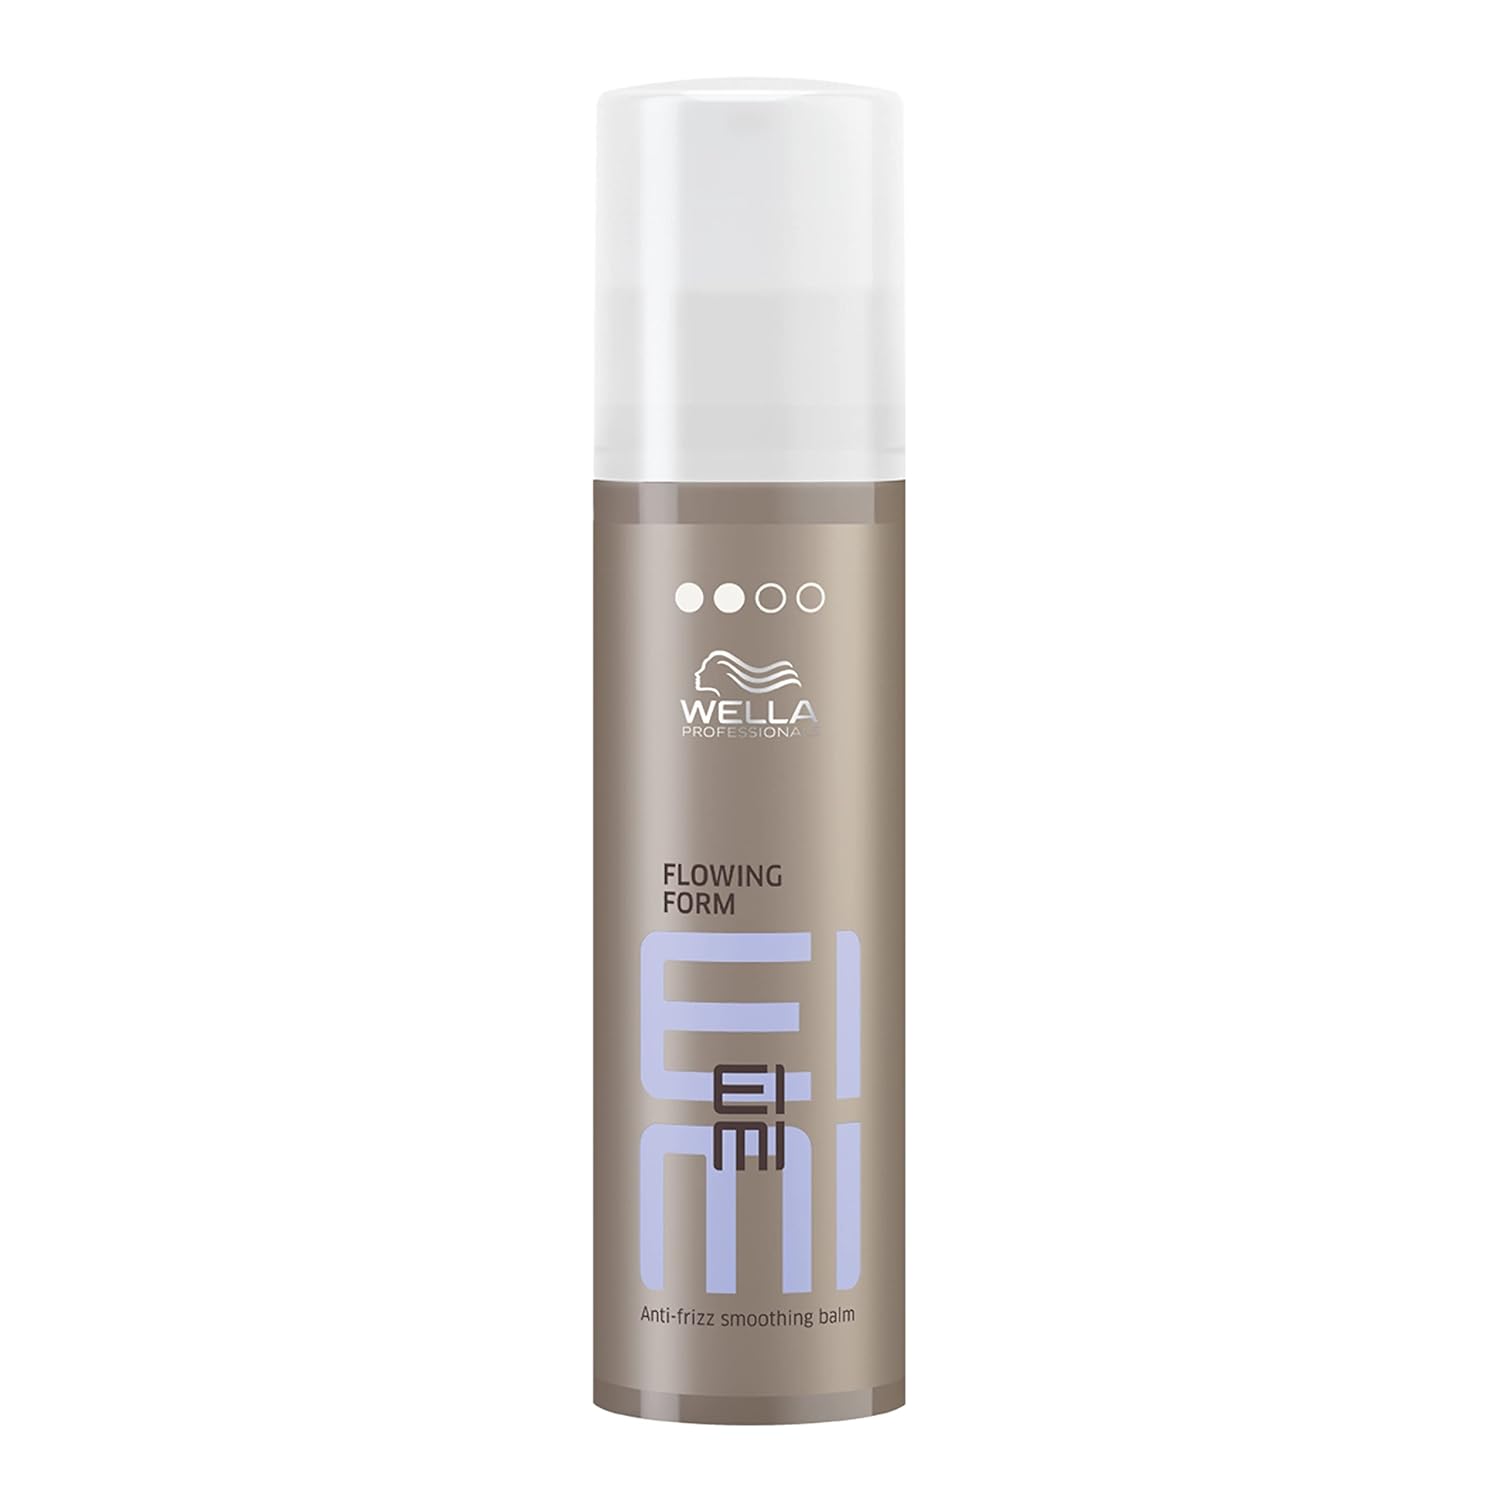 Wella Professionals EIMI Flowing Form Anti-Frizz Smoothing Balm, For Frizzy And Damaged Hair, Provid